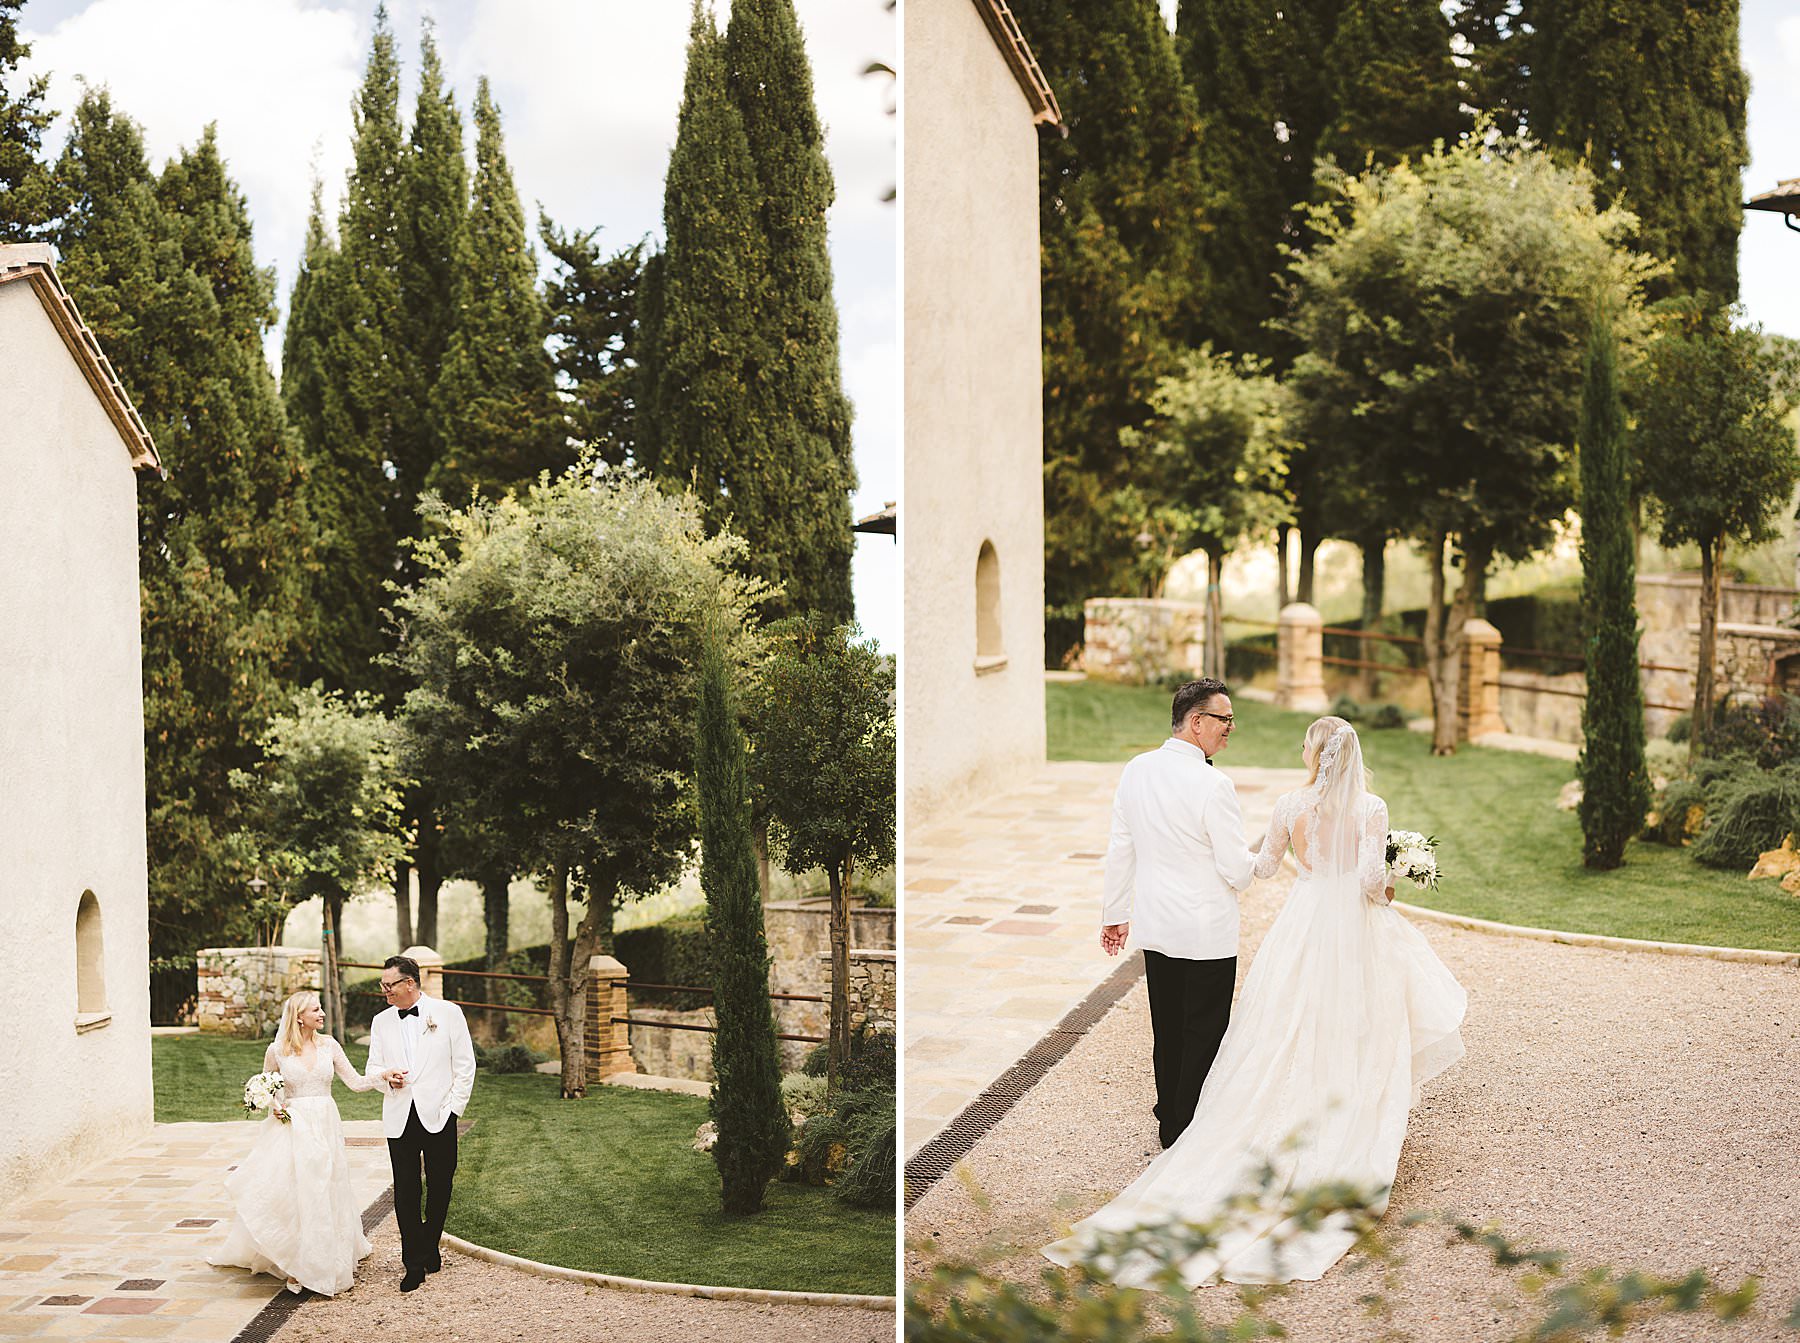 Elegant and spontaneous bride and groom elopement photos at Borgo Pignano private venue in the heart of Tuscany